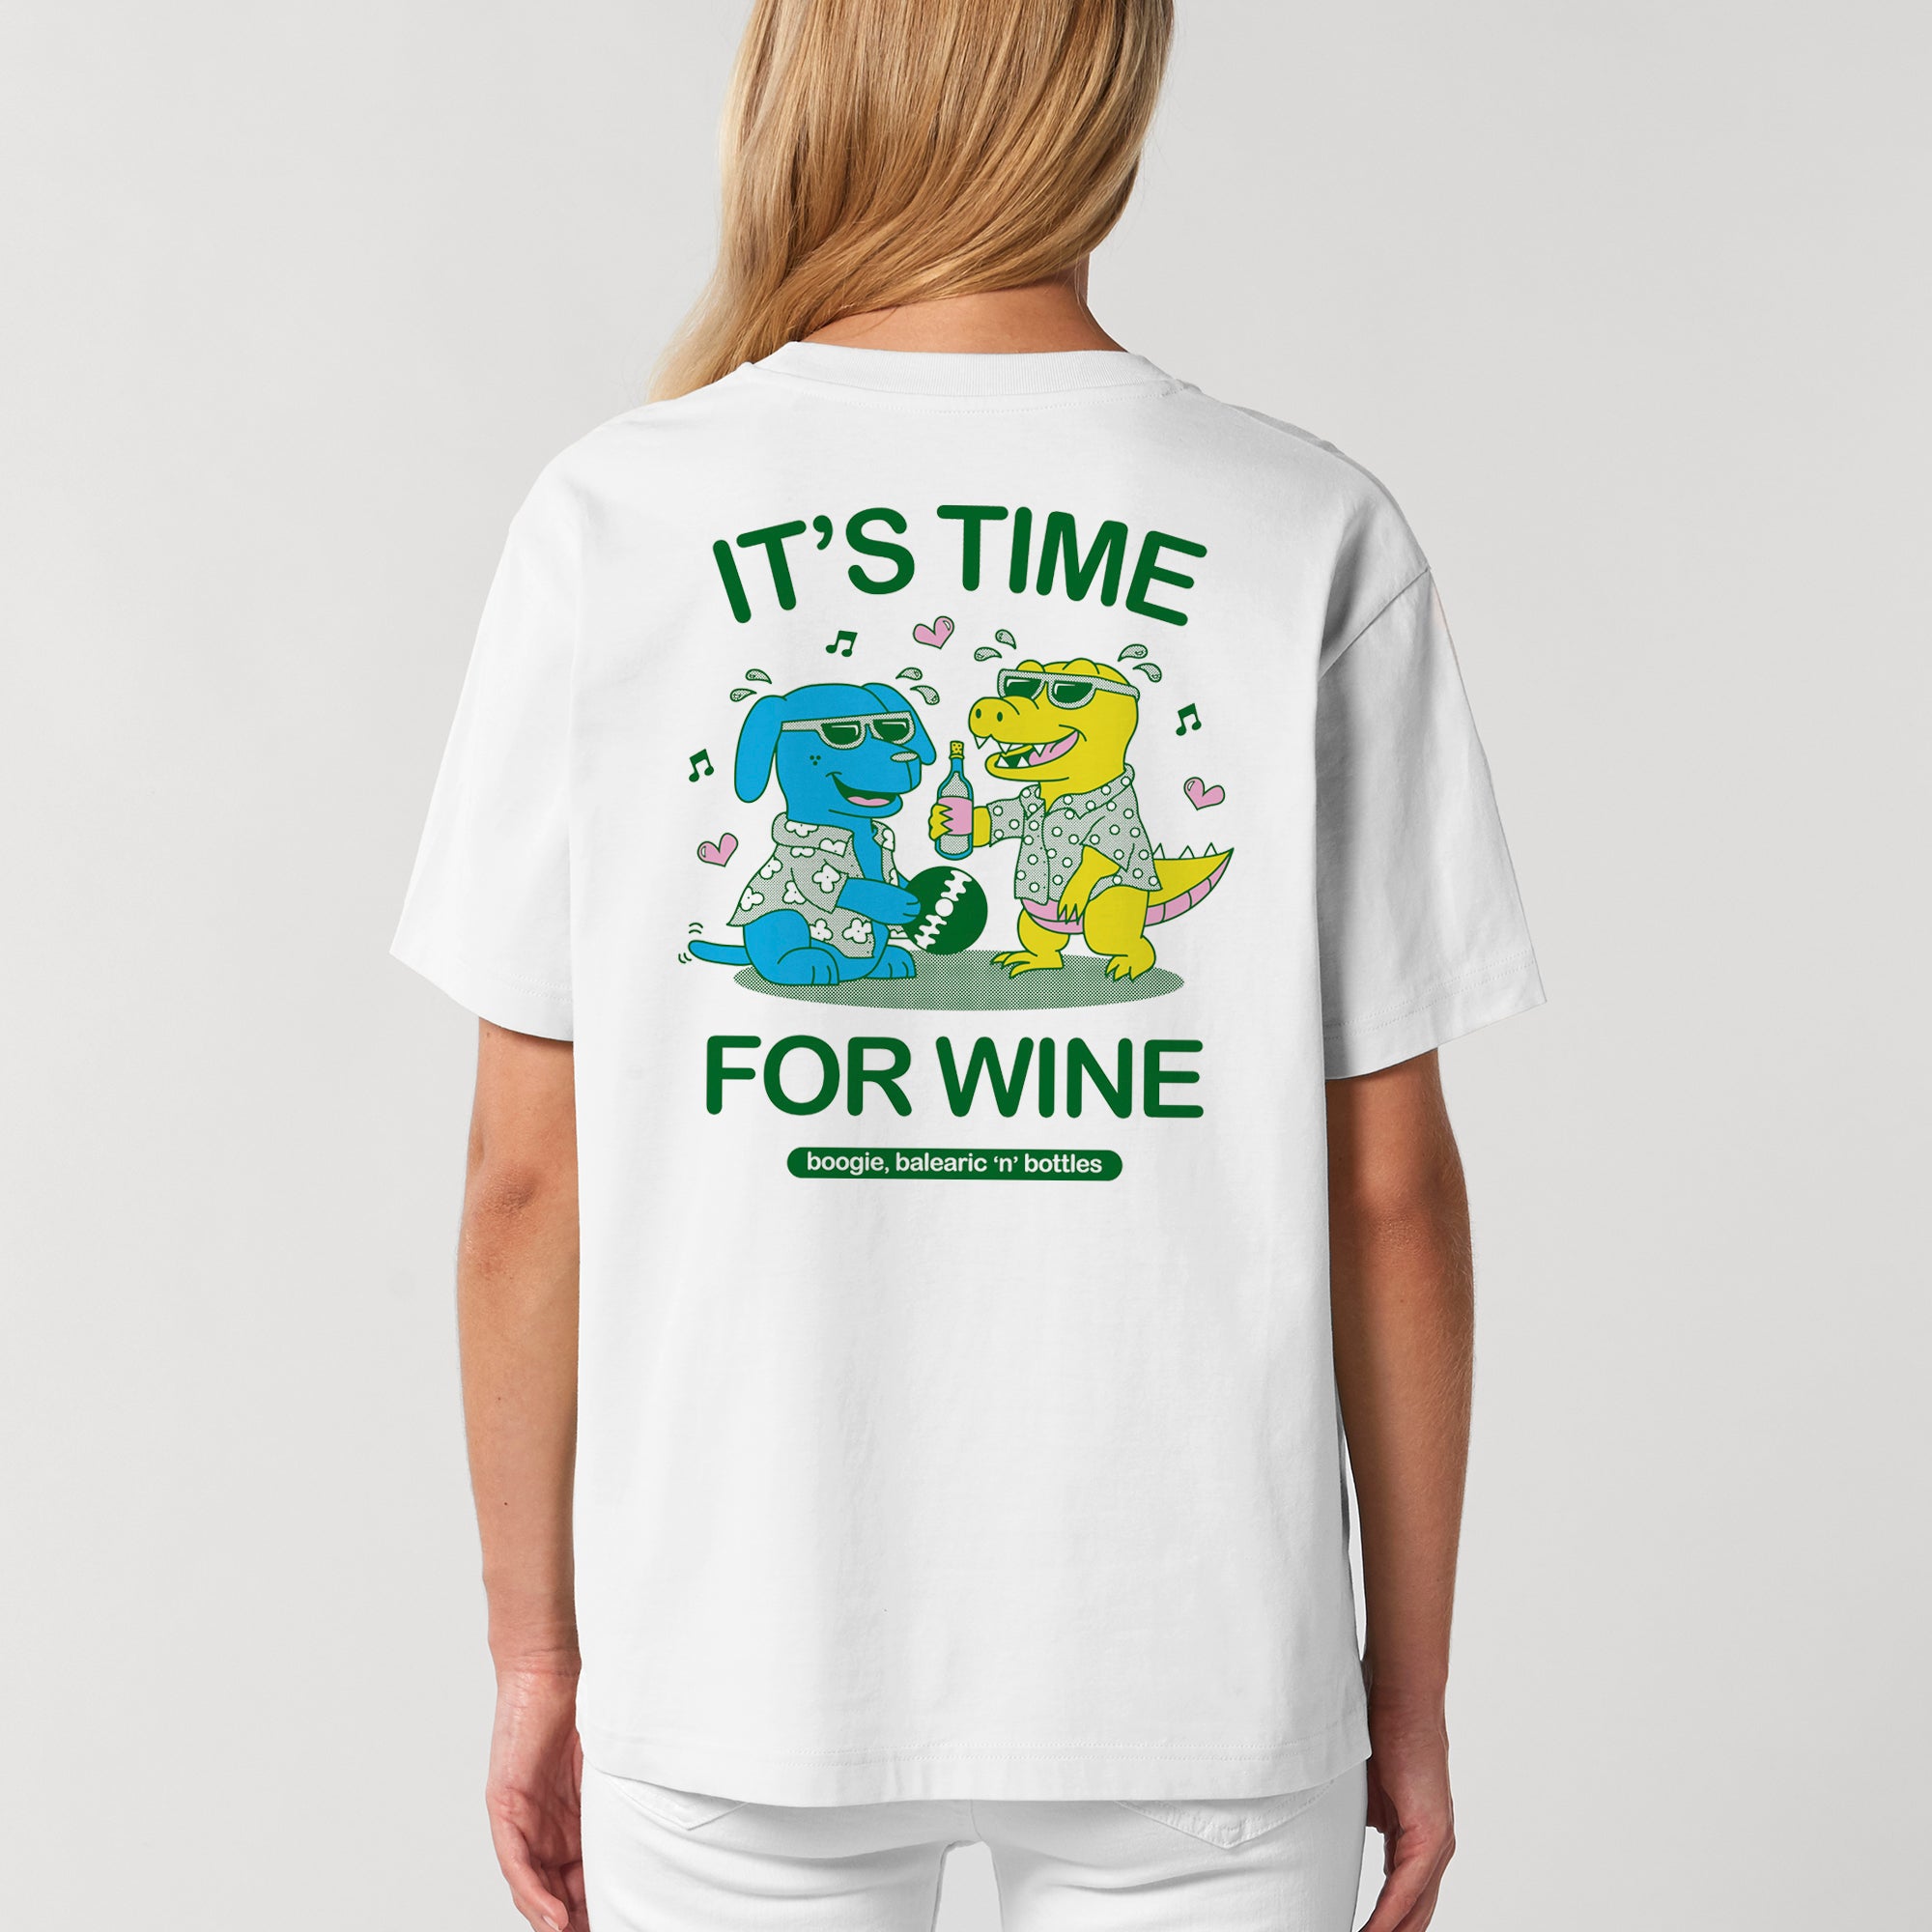 'It's Time For Wine' Short Sleeve Organic Cotton T-shirt